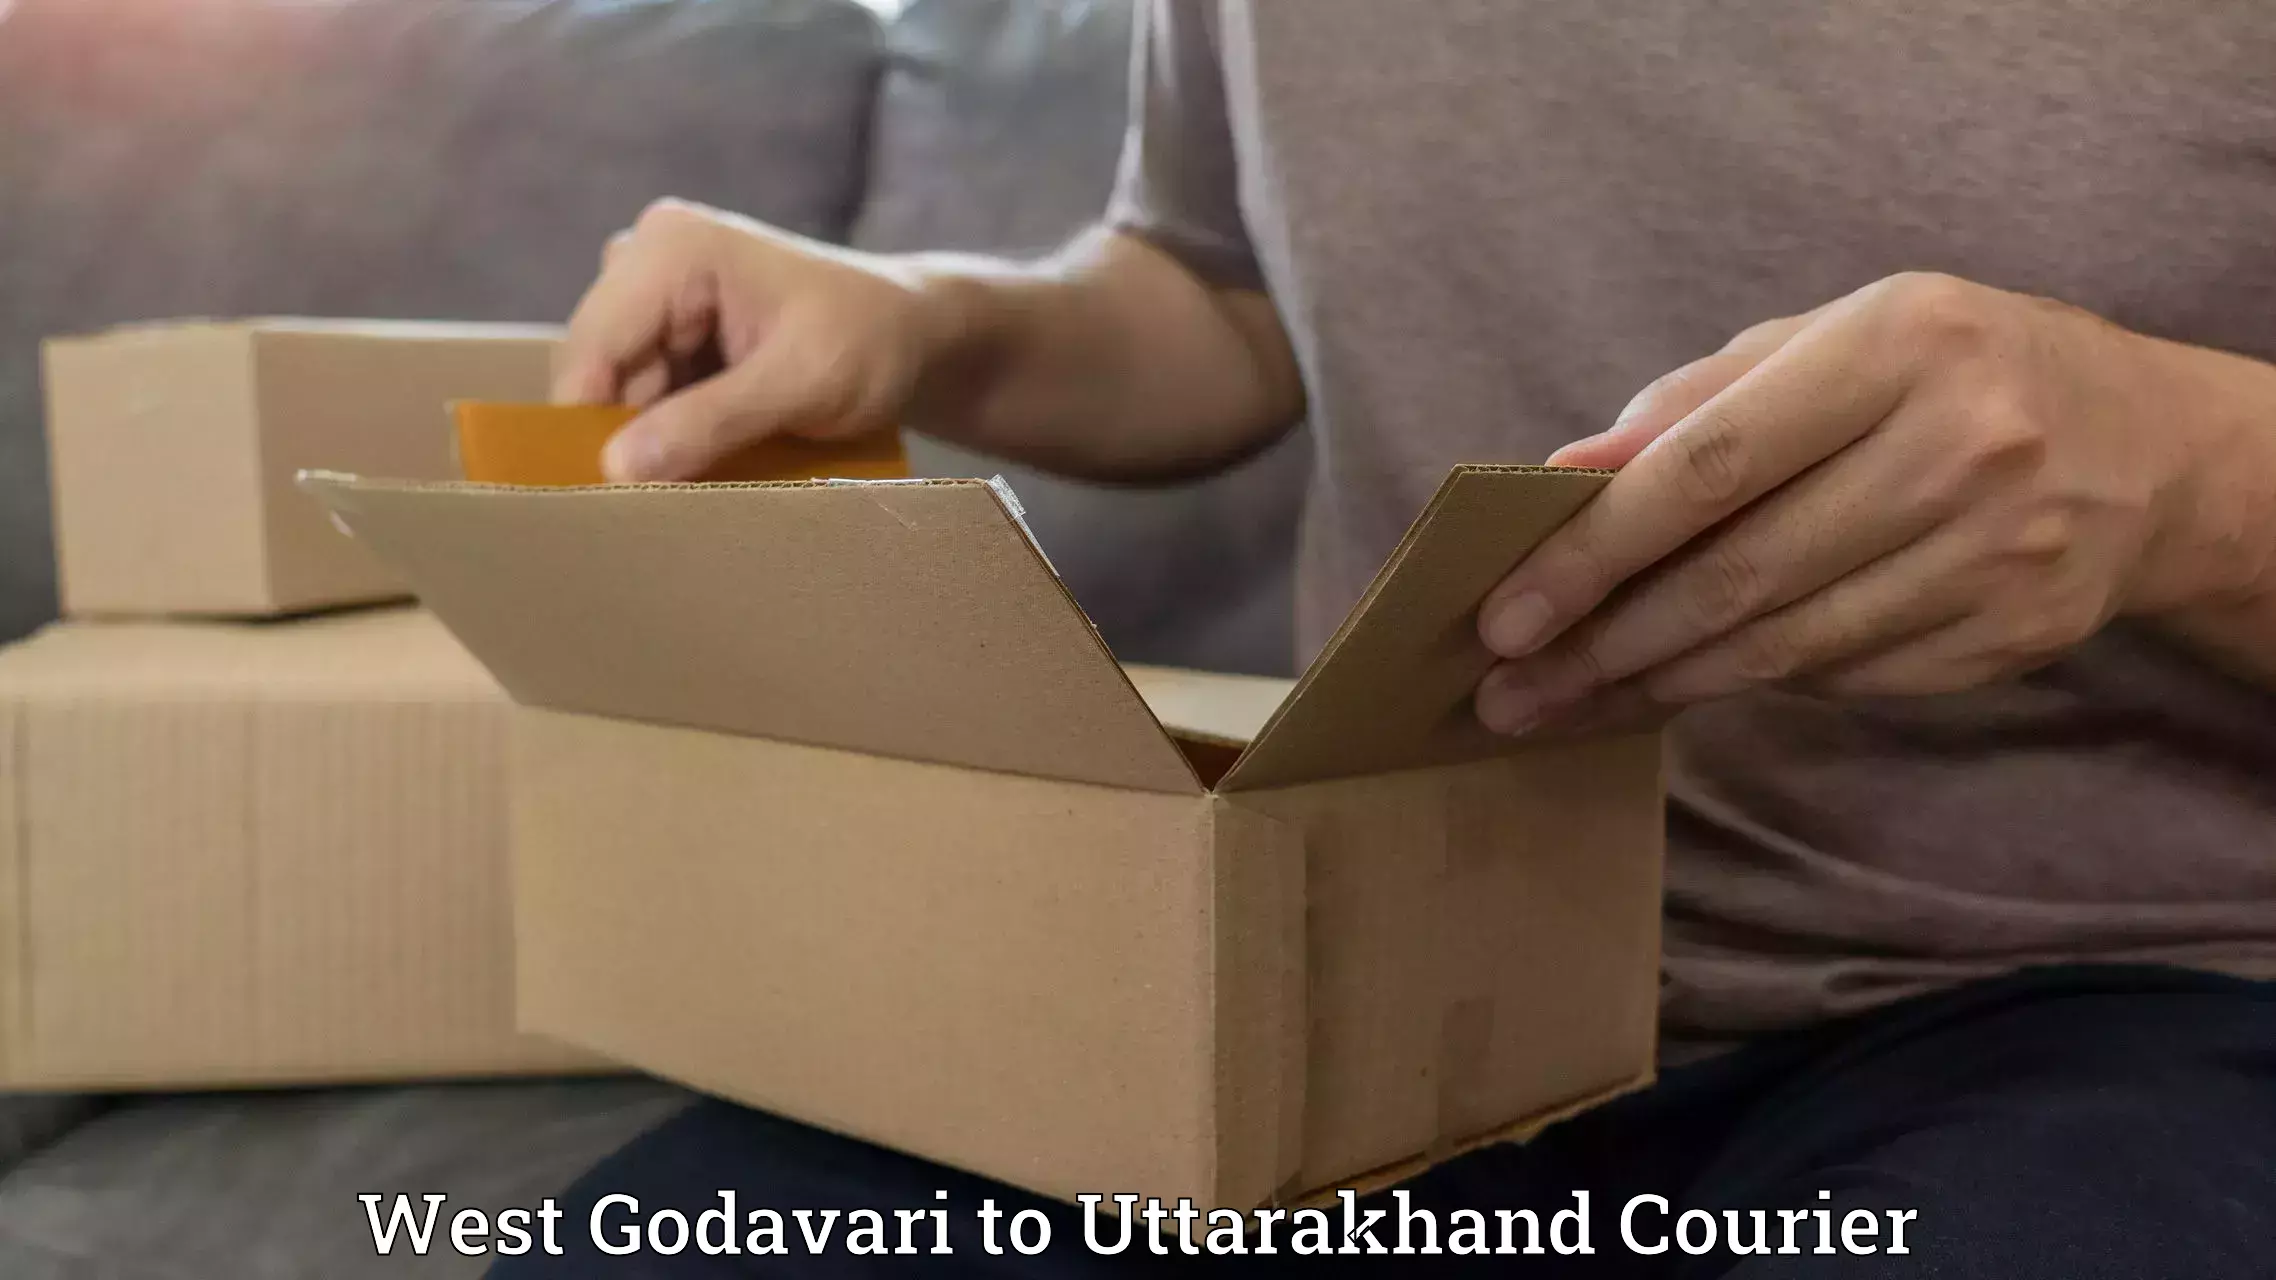 Courier service booking West Godavari to Rudrapur